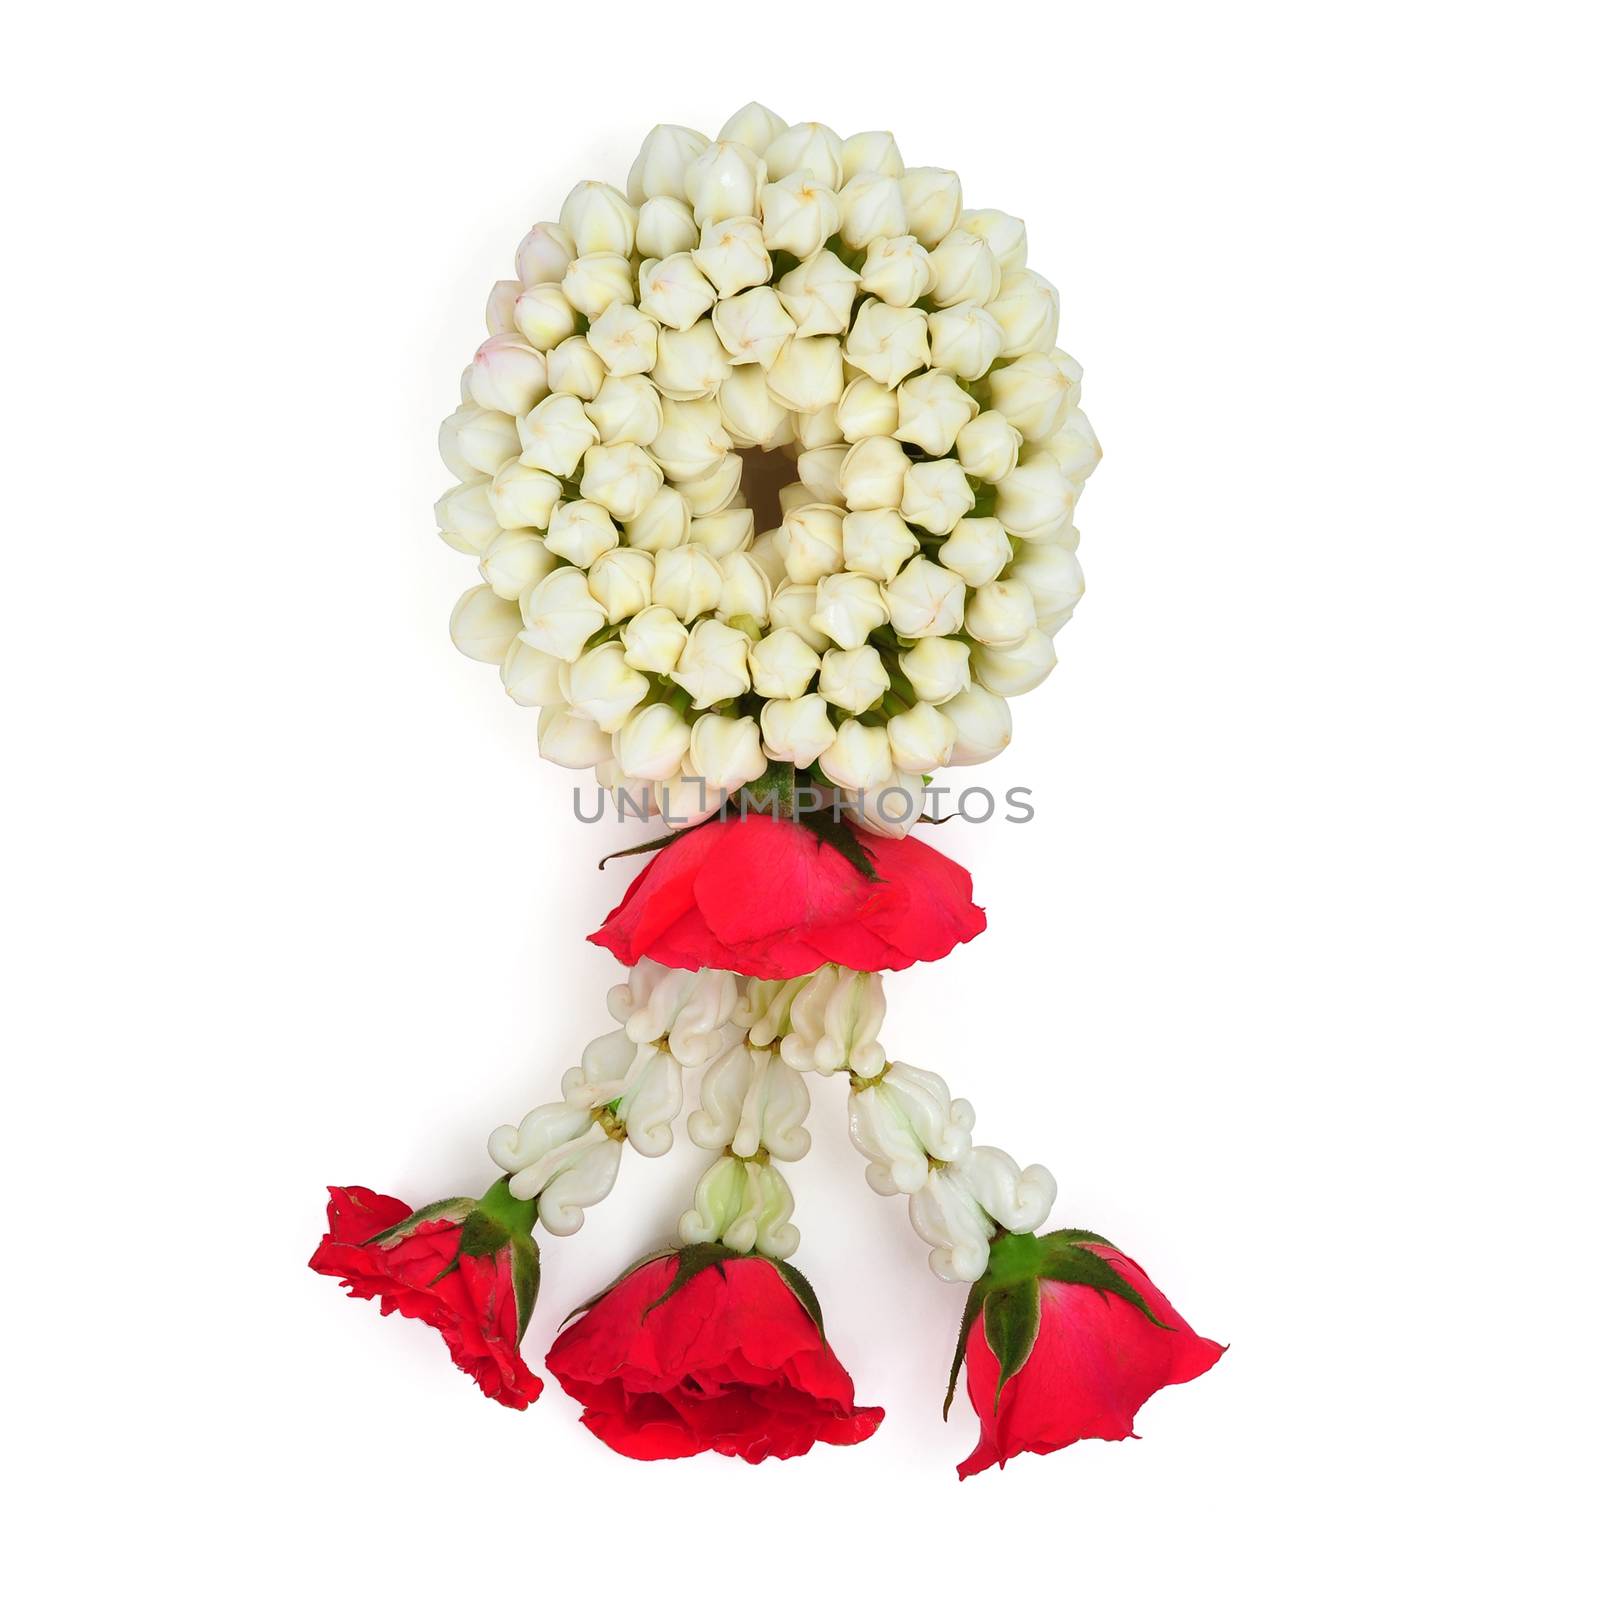 Thailand Garland with Clipping Path